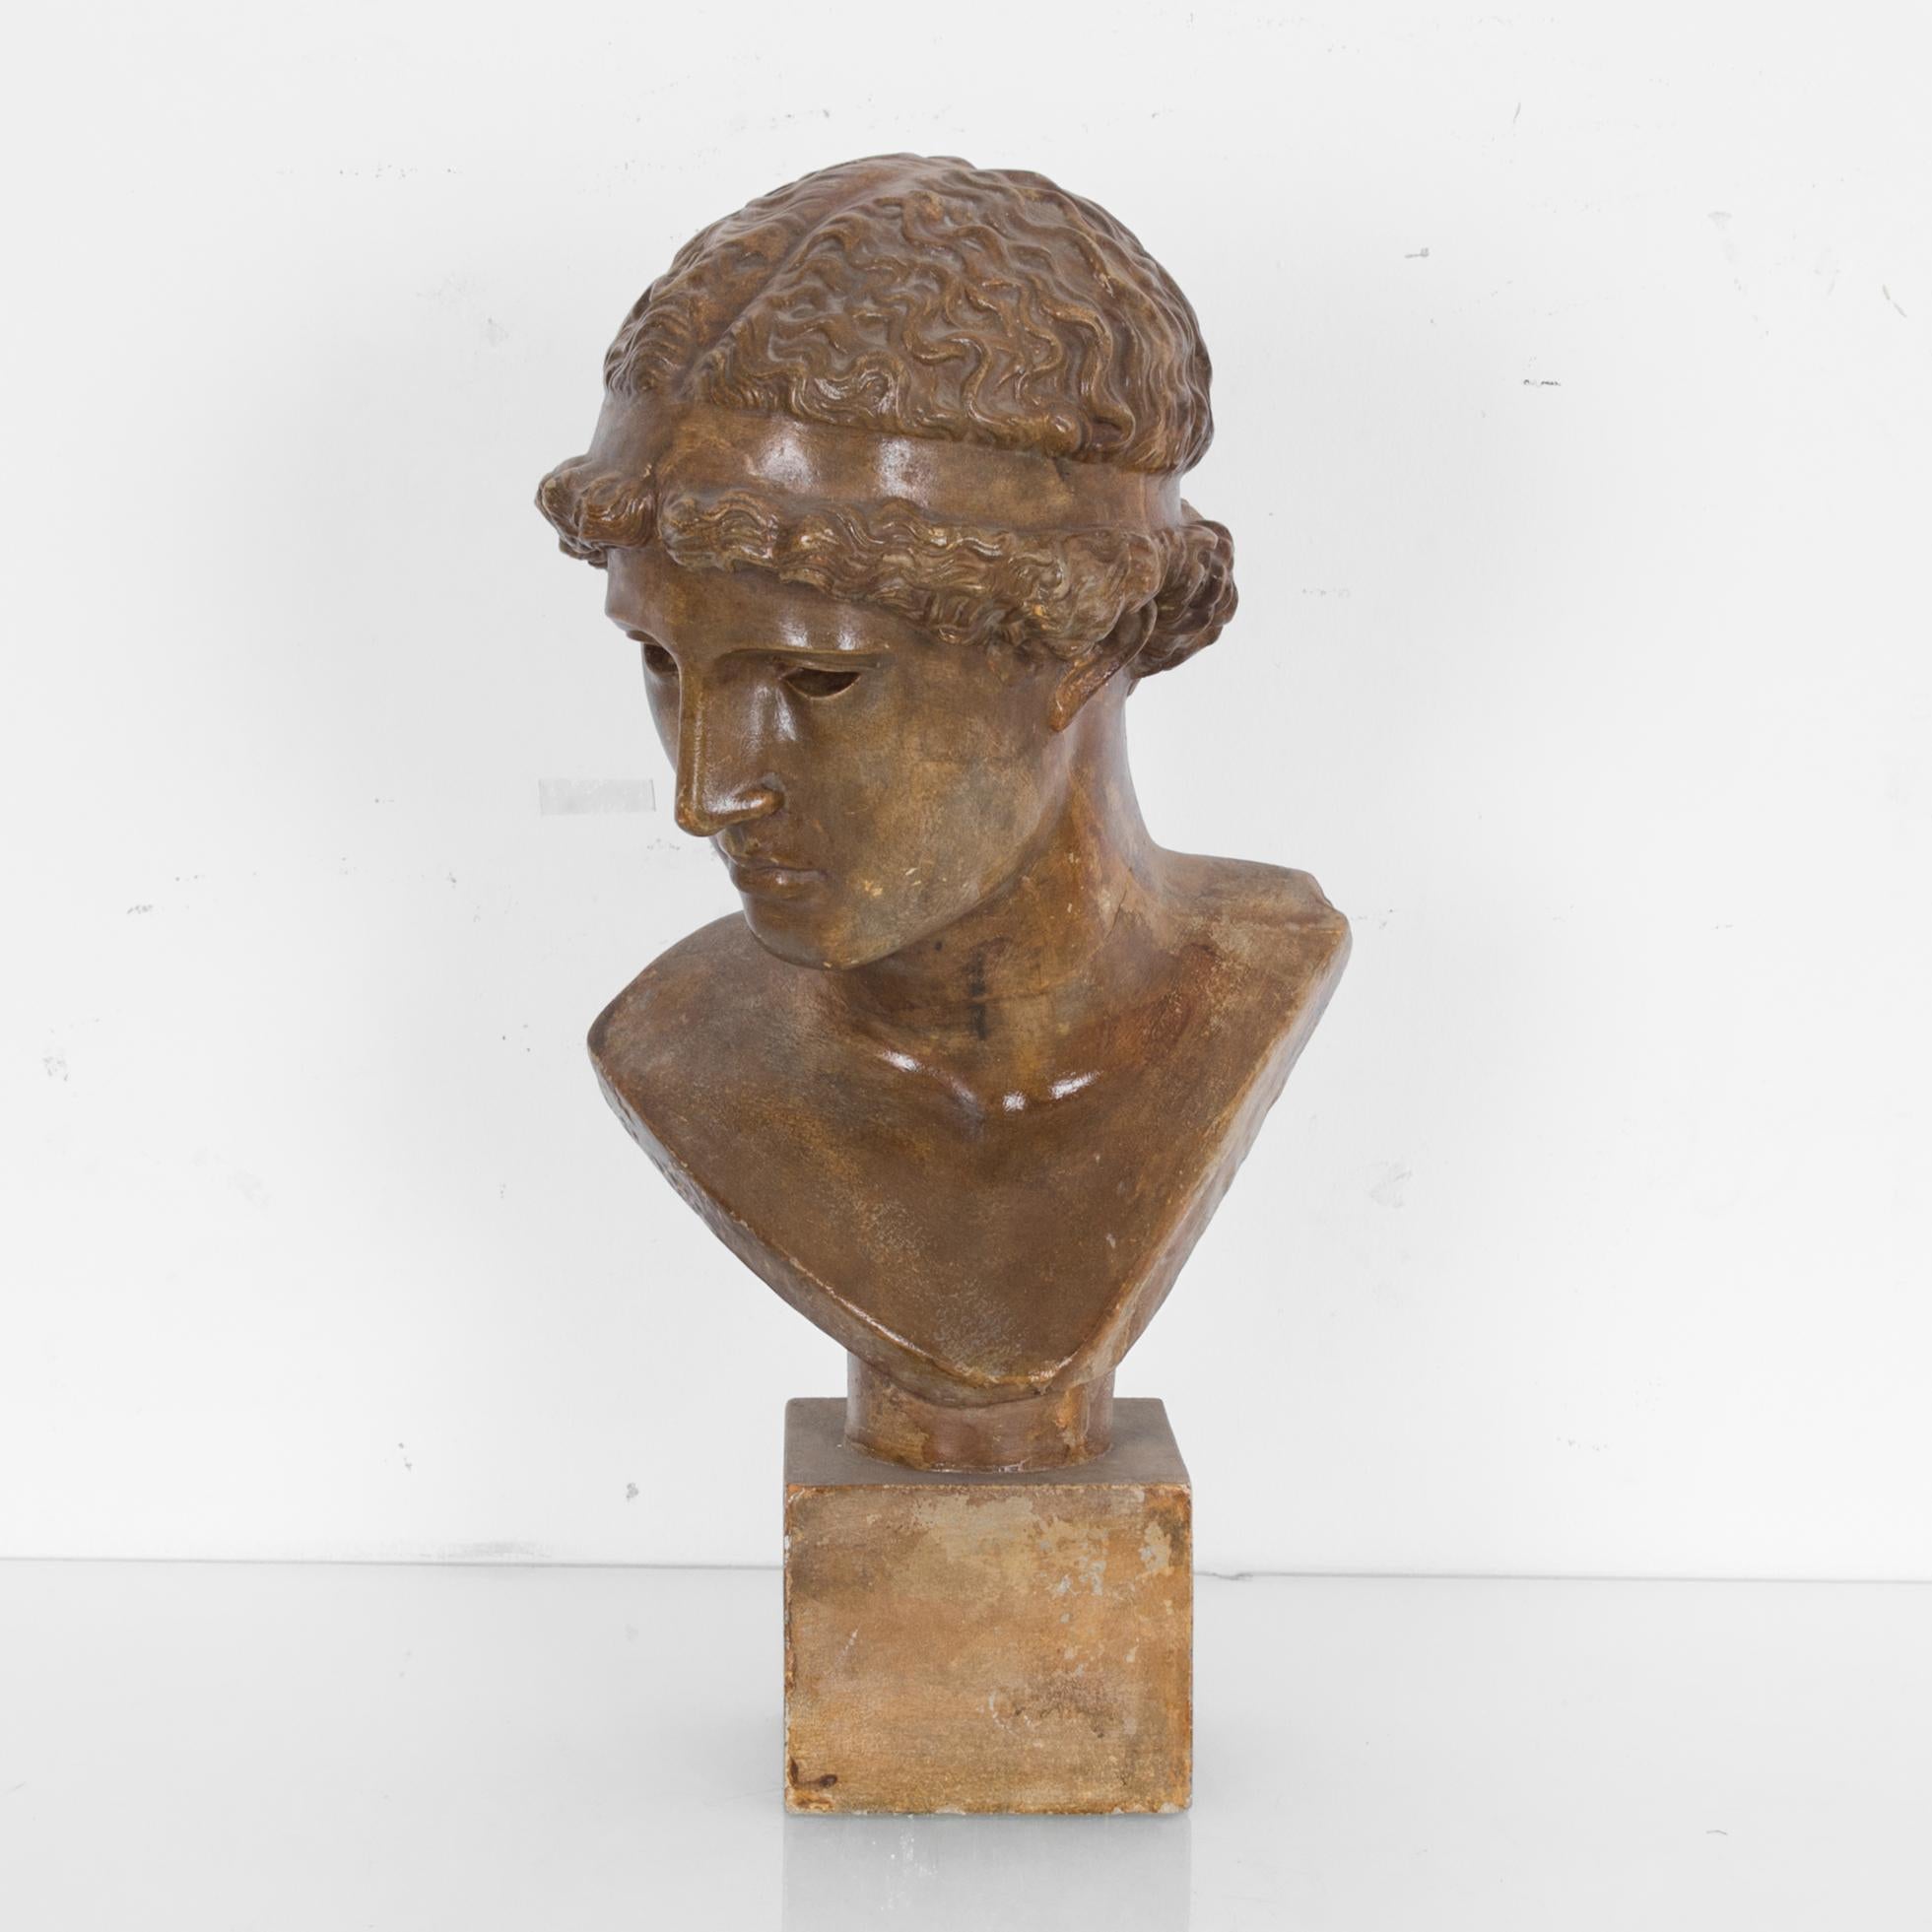 A sculpted bronze colored bust produced in France, circa 1950. References Classical Greek and neoclassical statues, like Kritios Boy and Donatello’s David. The glossy finish, along with the simplified yet detailed features gives this piece an august